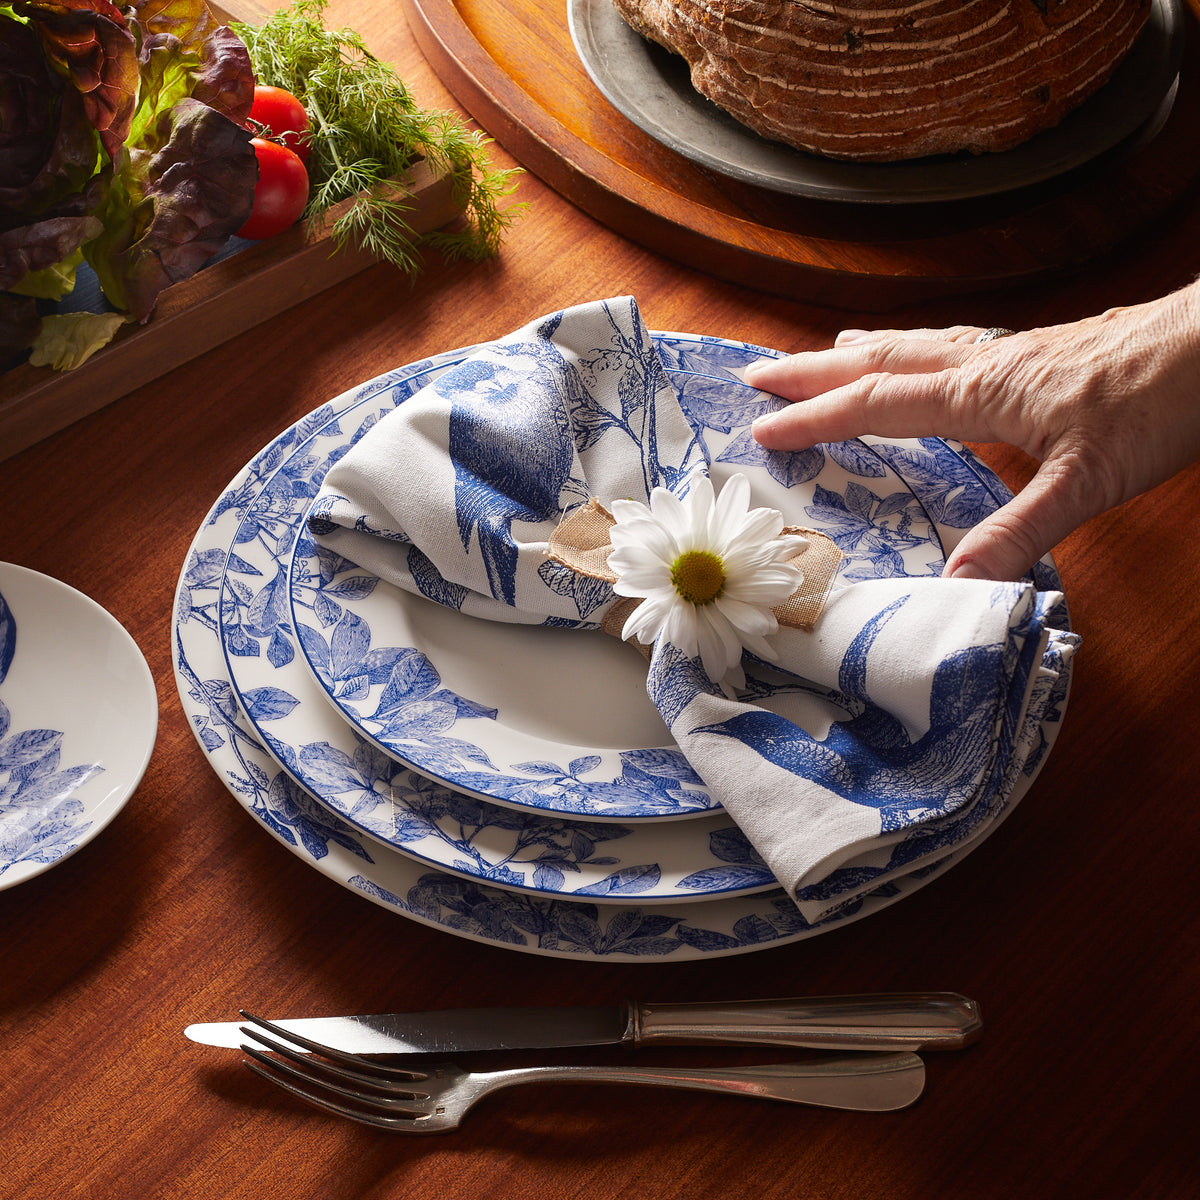 A hand adjusts a napkin with a daisy on an Arbor Rimmed Charger Plate by Caskata Artisanal Home, placed on a wooden table with cutlery, bread, and vegetables in the background.